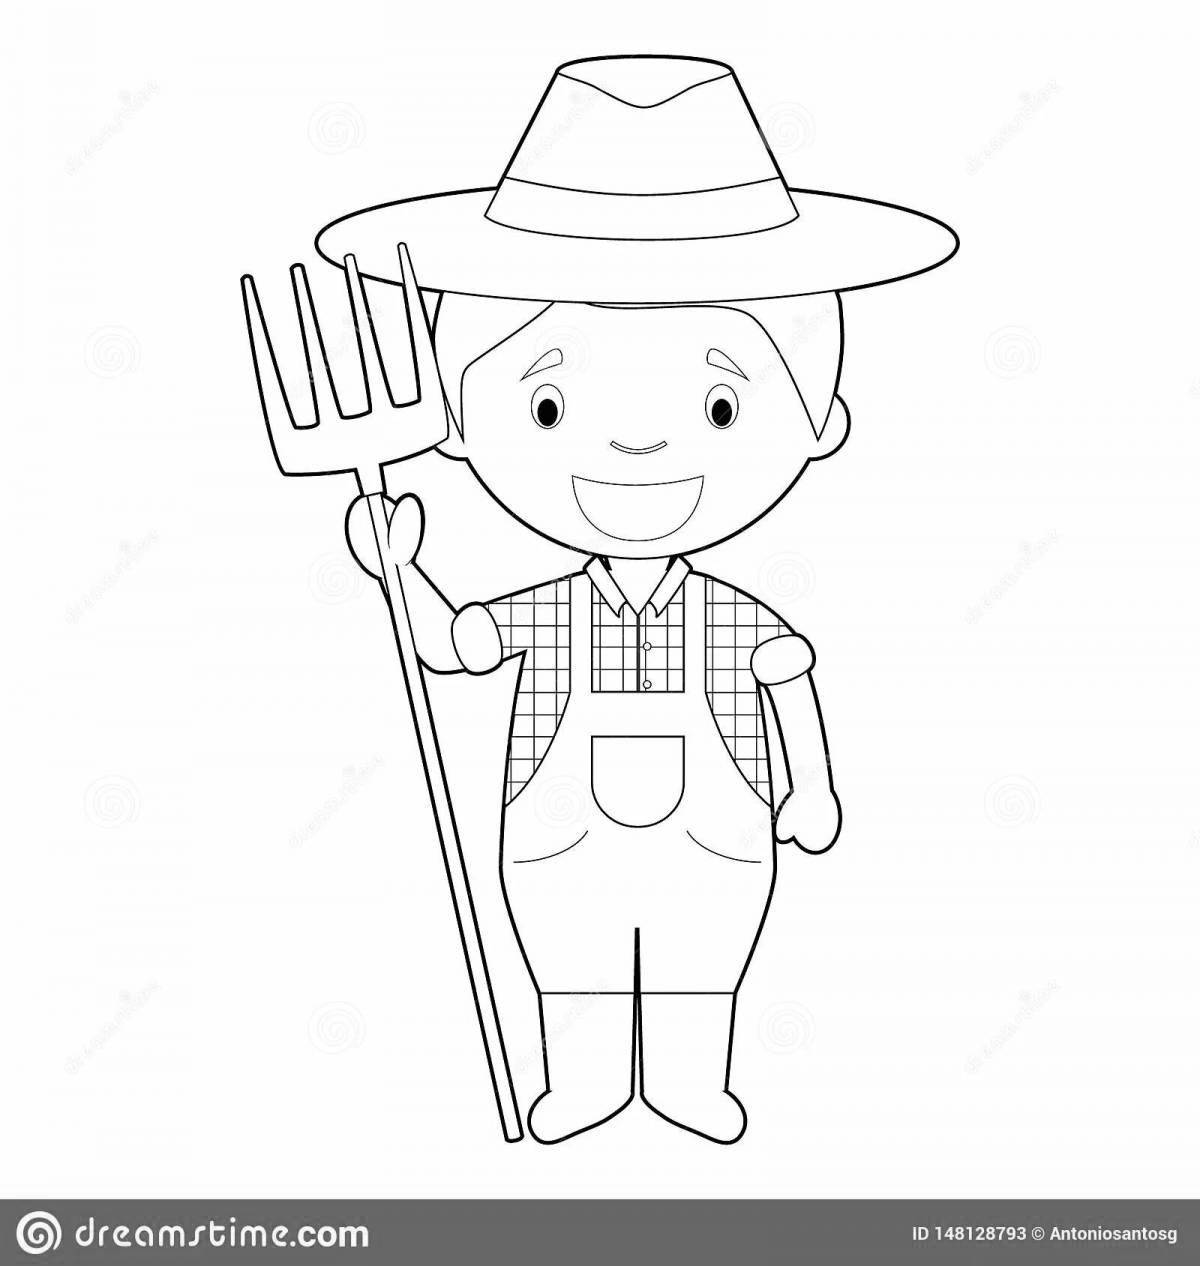 Live farmer coloring book for kids